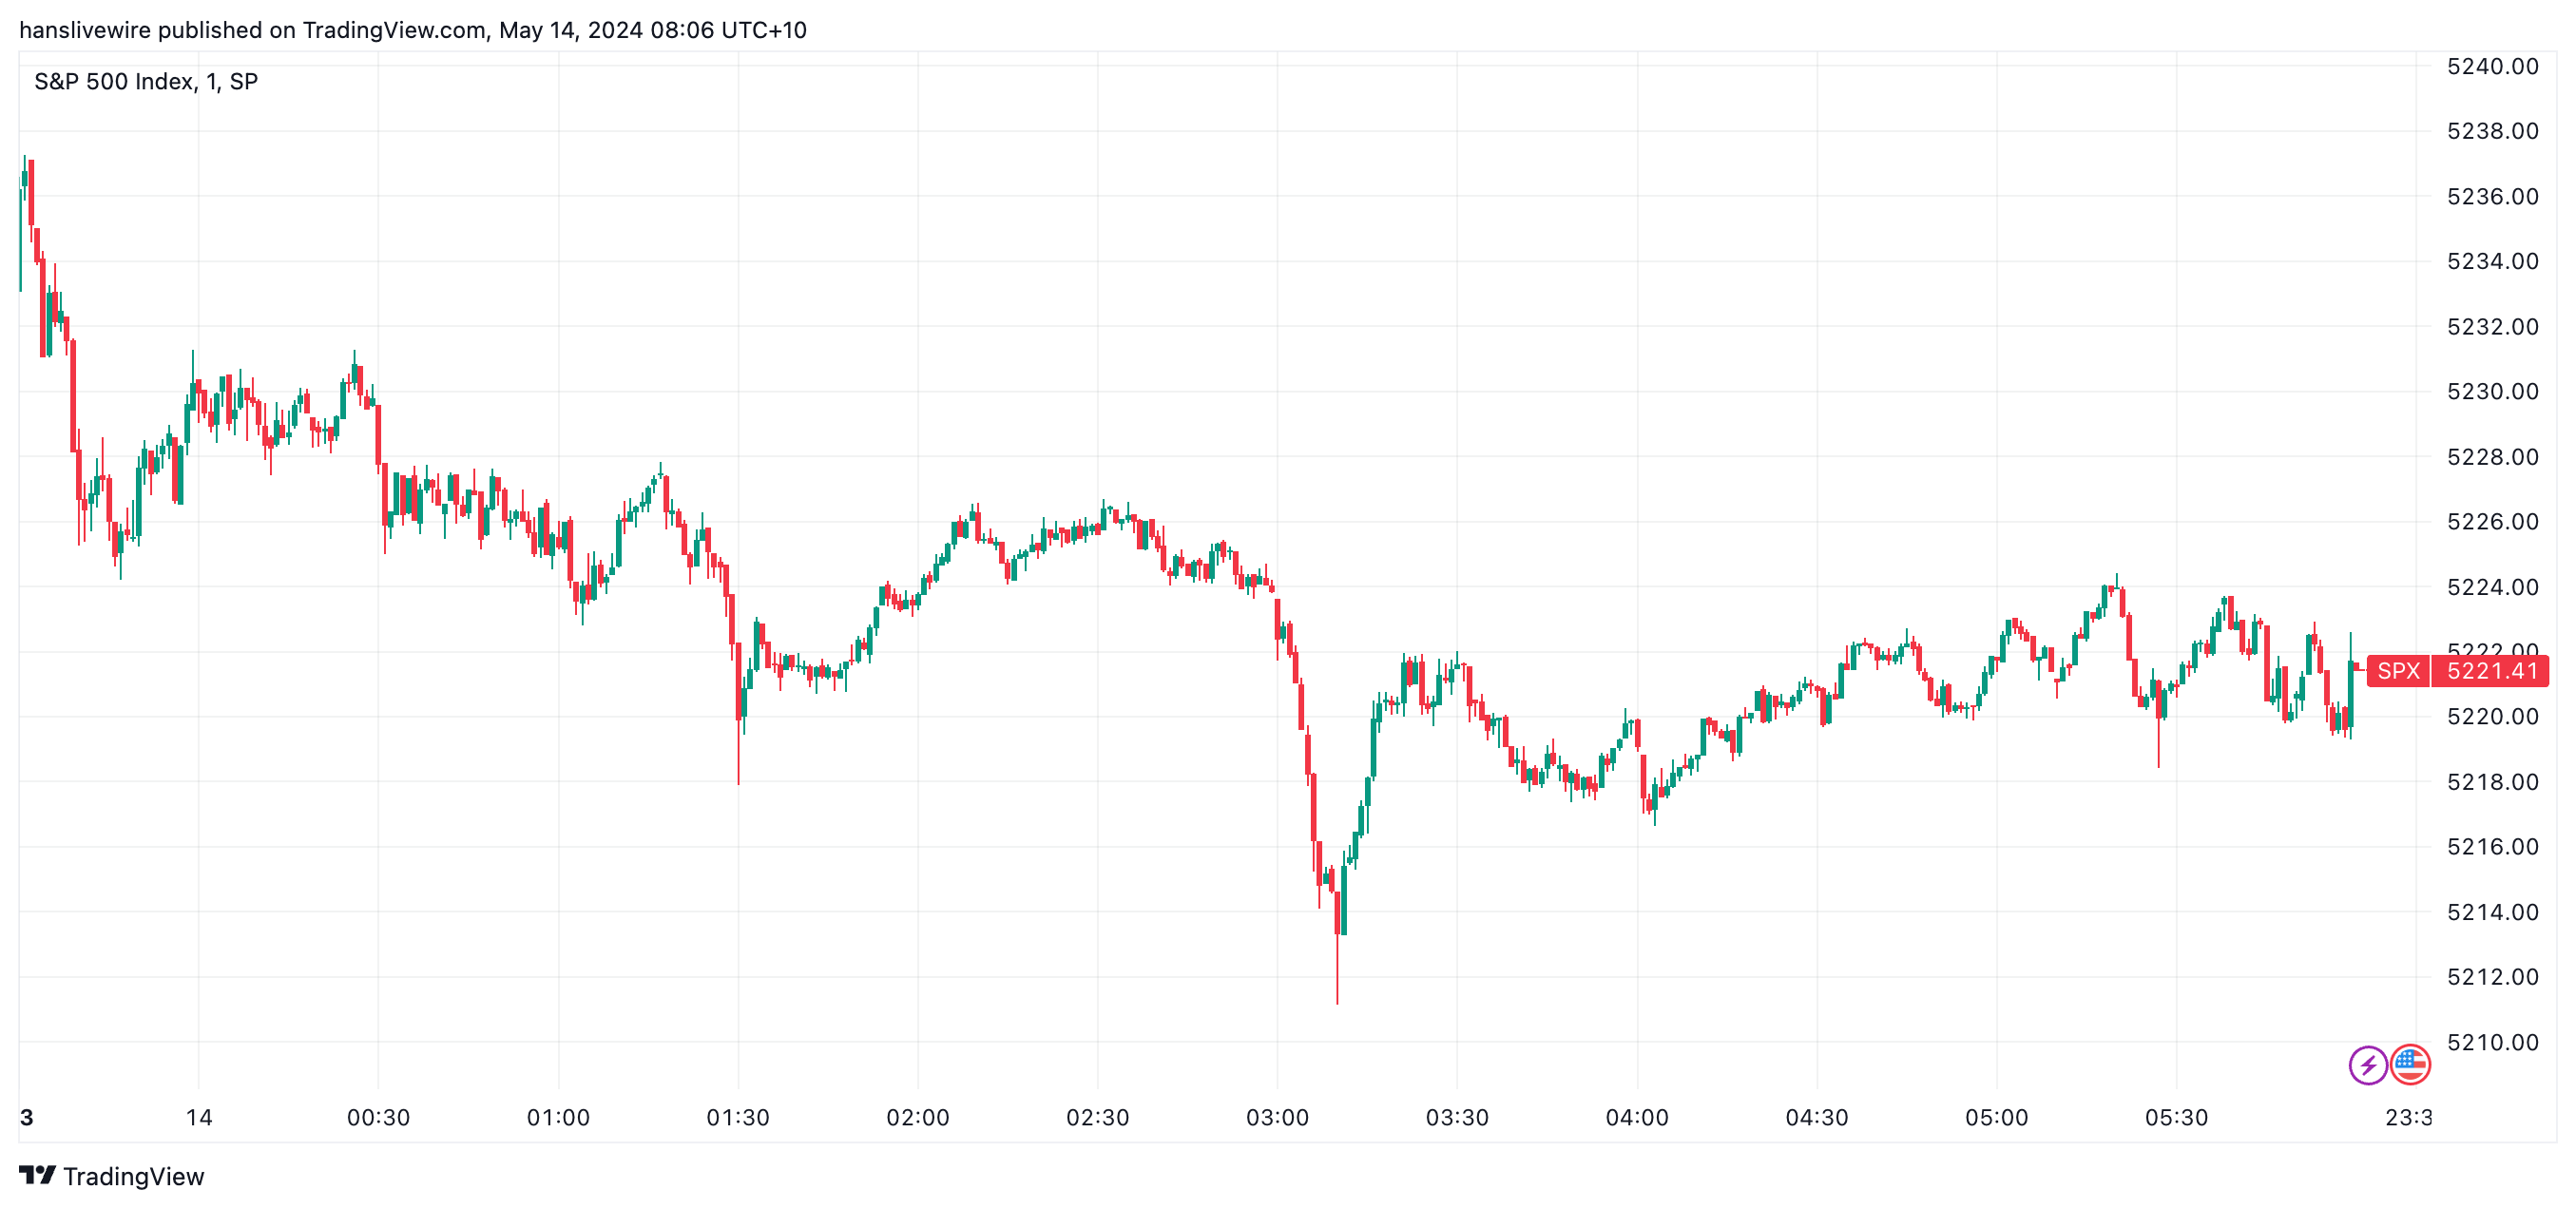 A 25 point trading range indicates traders are waiting and watching for Wednesday's US CPI and retail sales prints. (Source: TradingView)